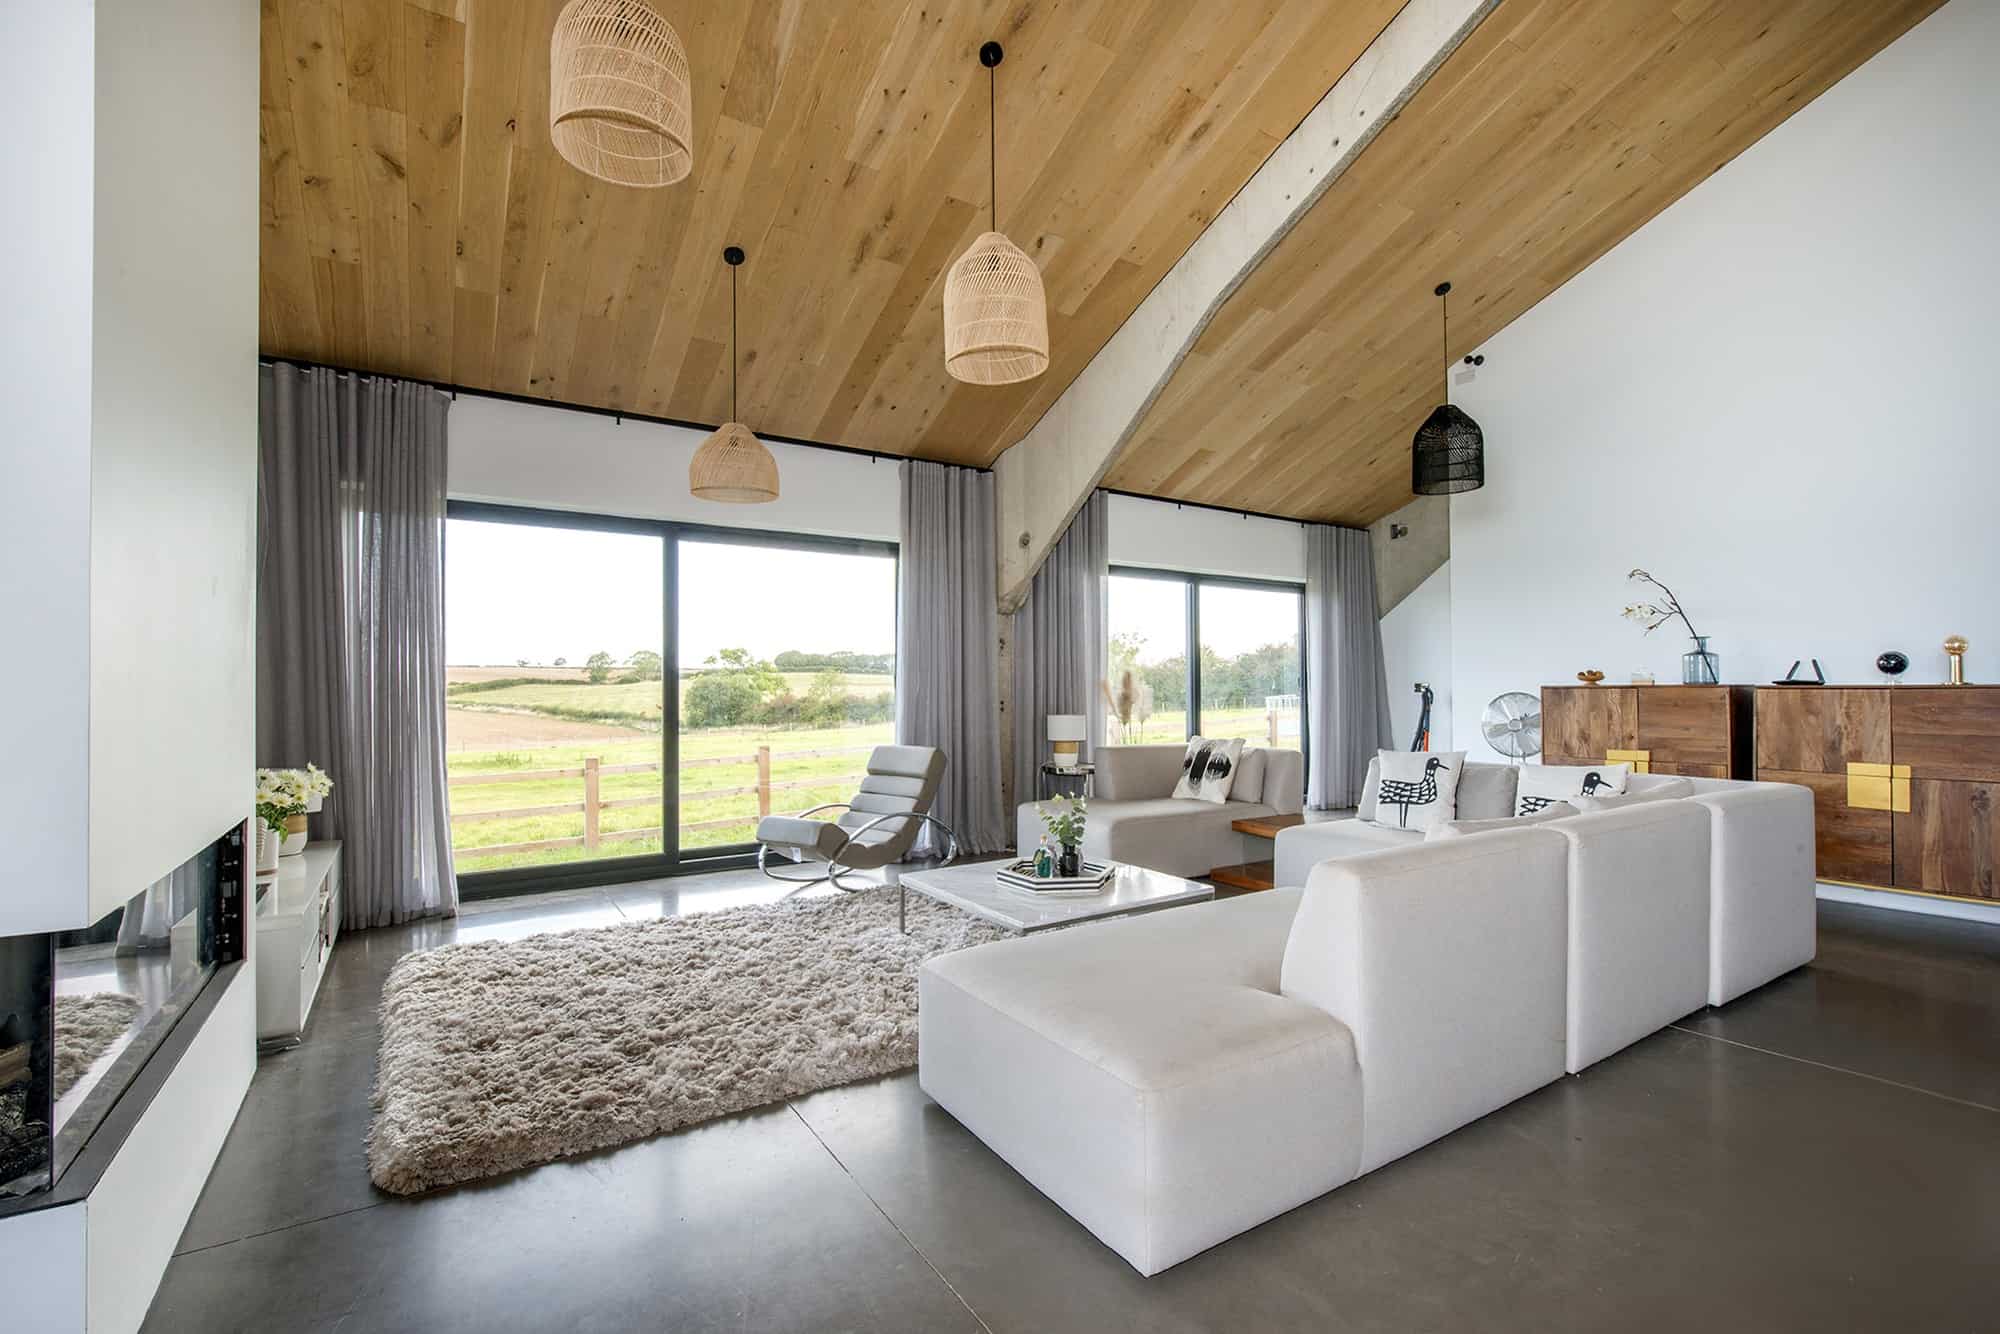 Kibworth Lodge LE8 - A contemporary barn structure with modern and sleek interiors - The Location Guys